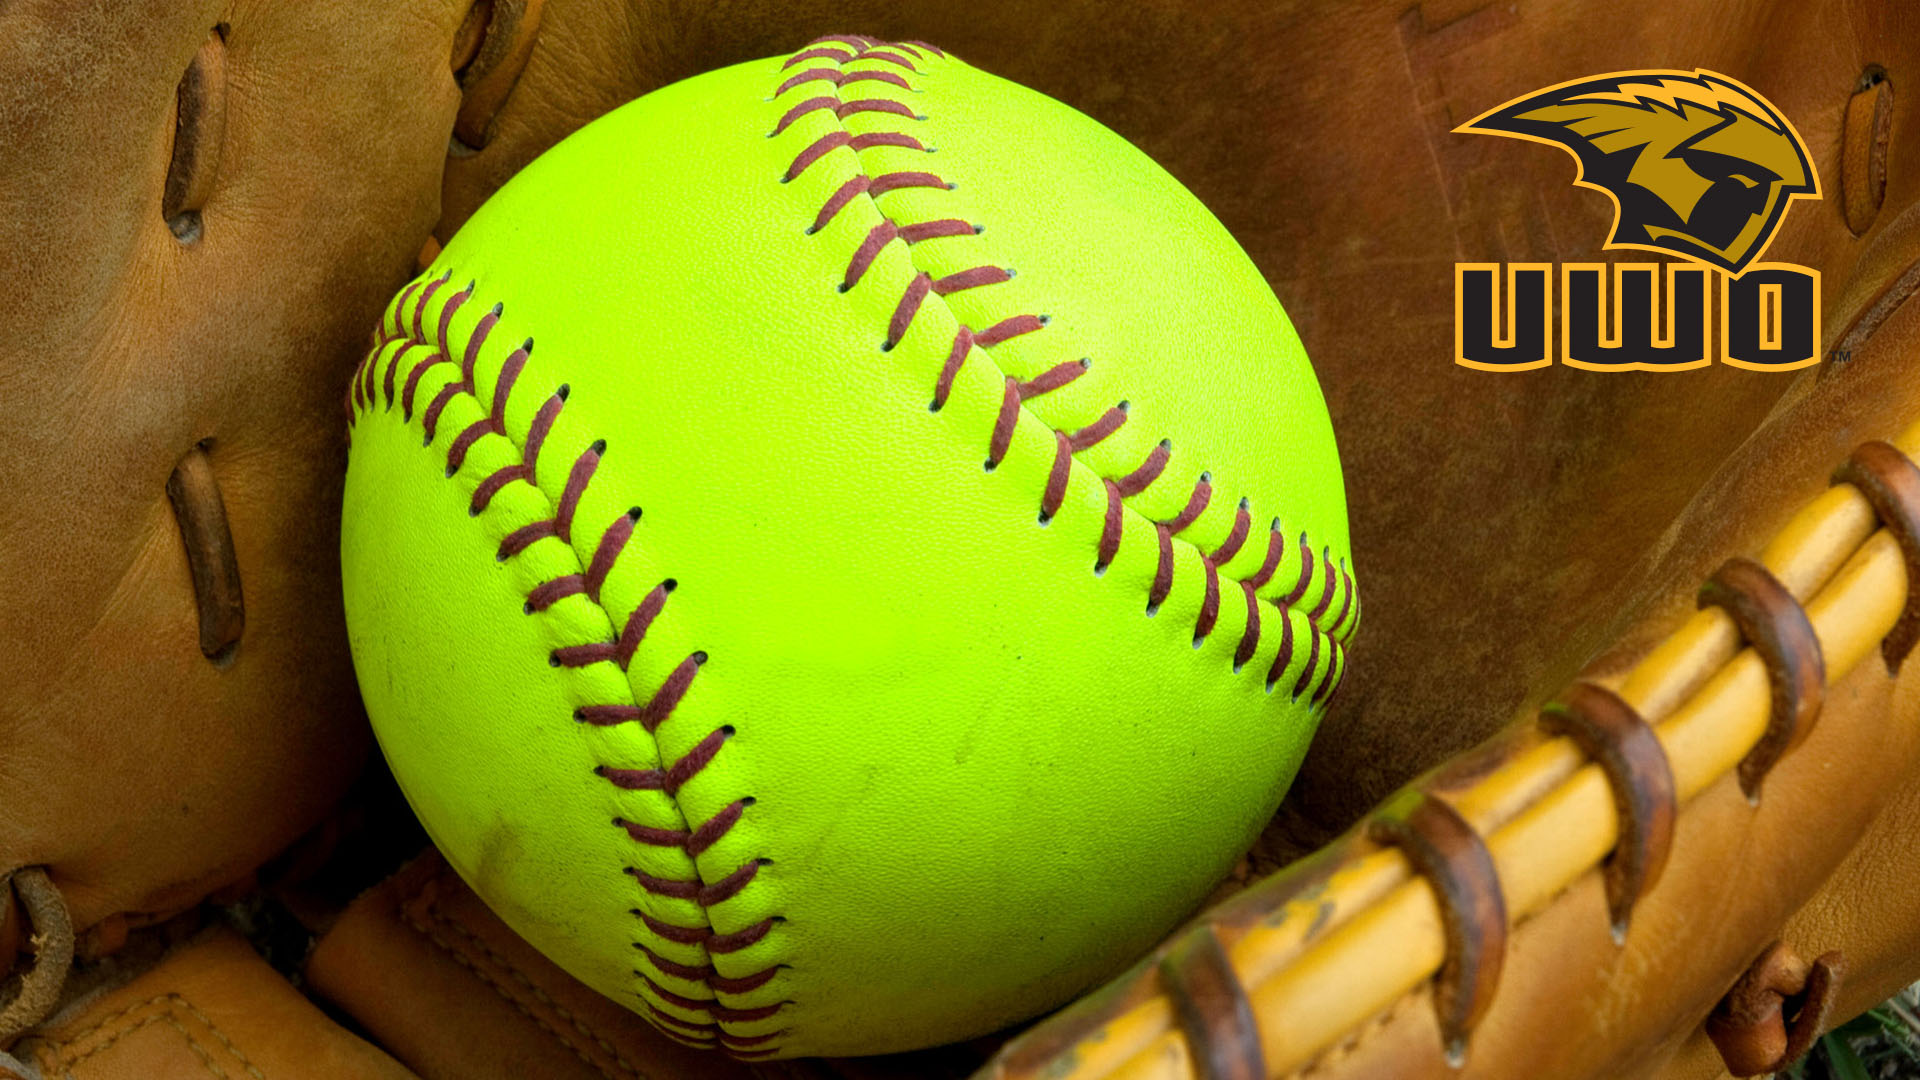 Thursday's Softball Games Between Titans, Muskies Canceled